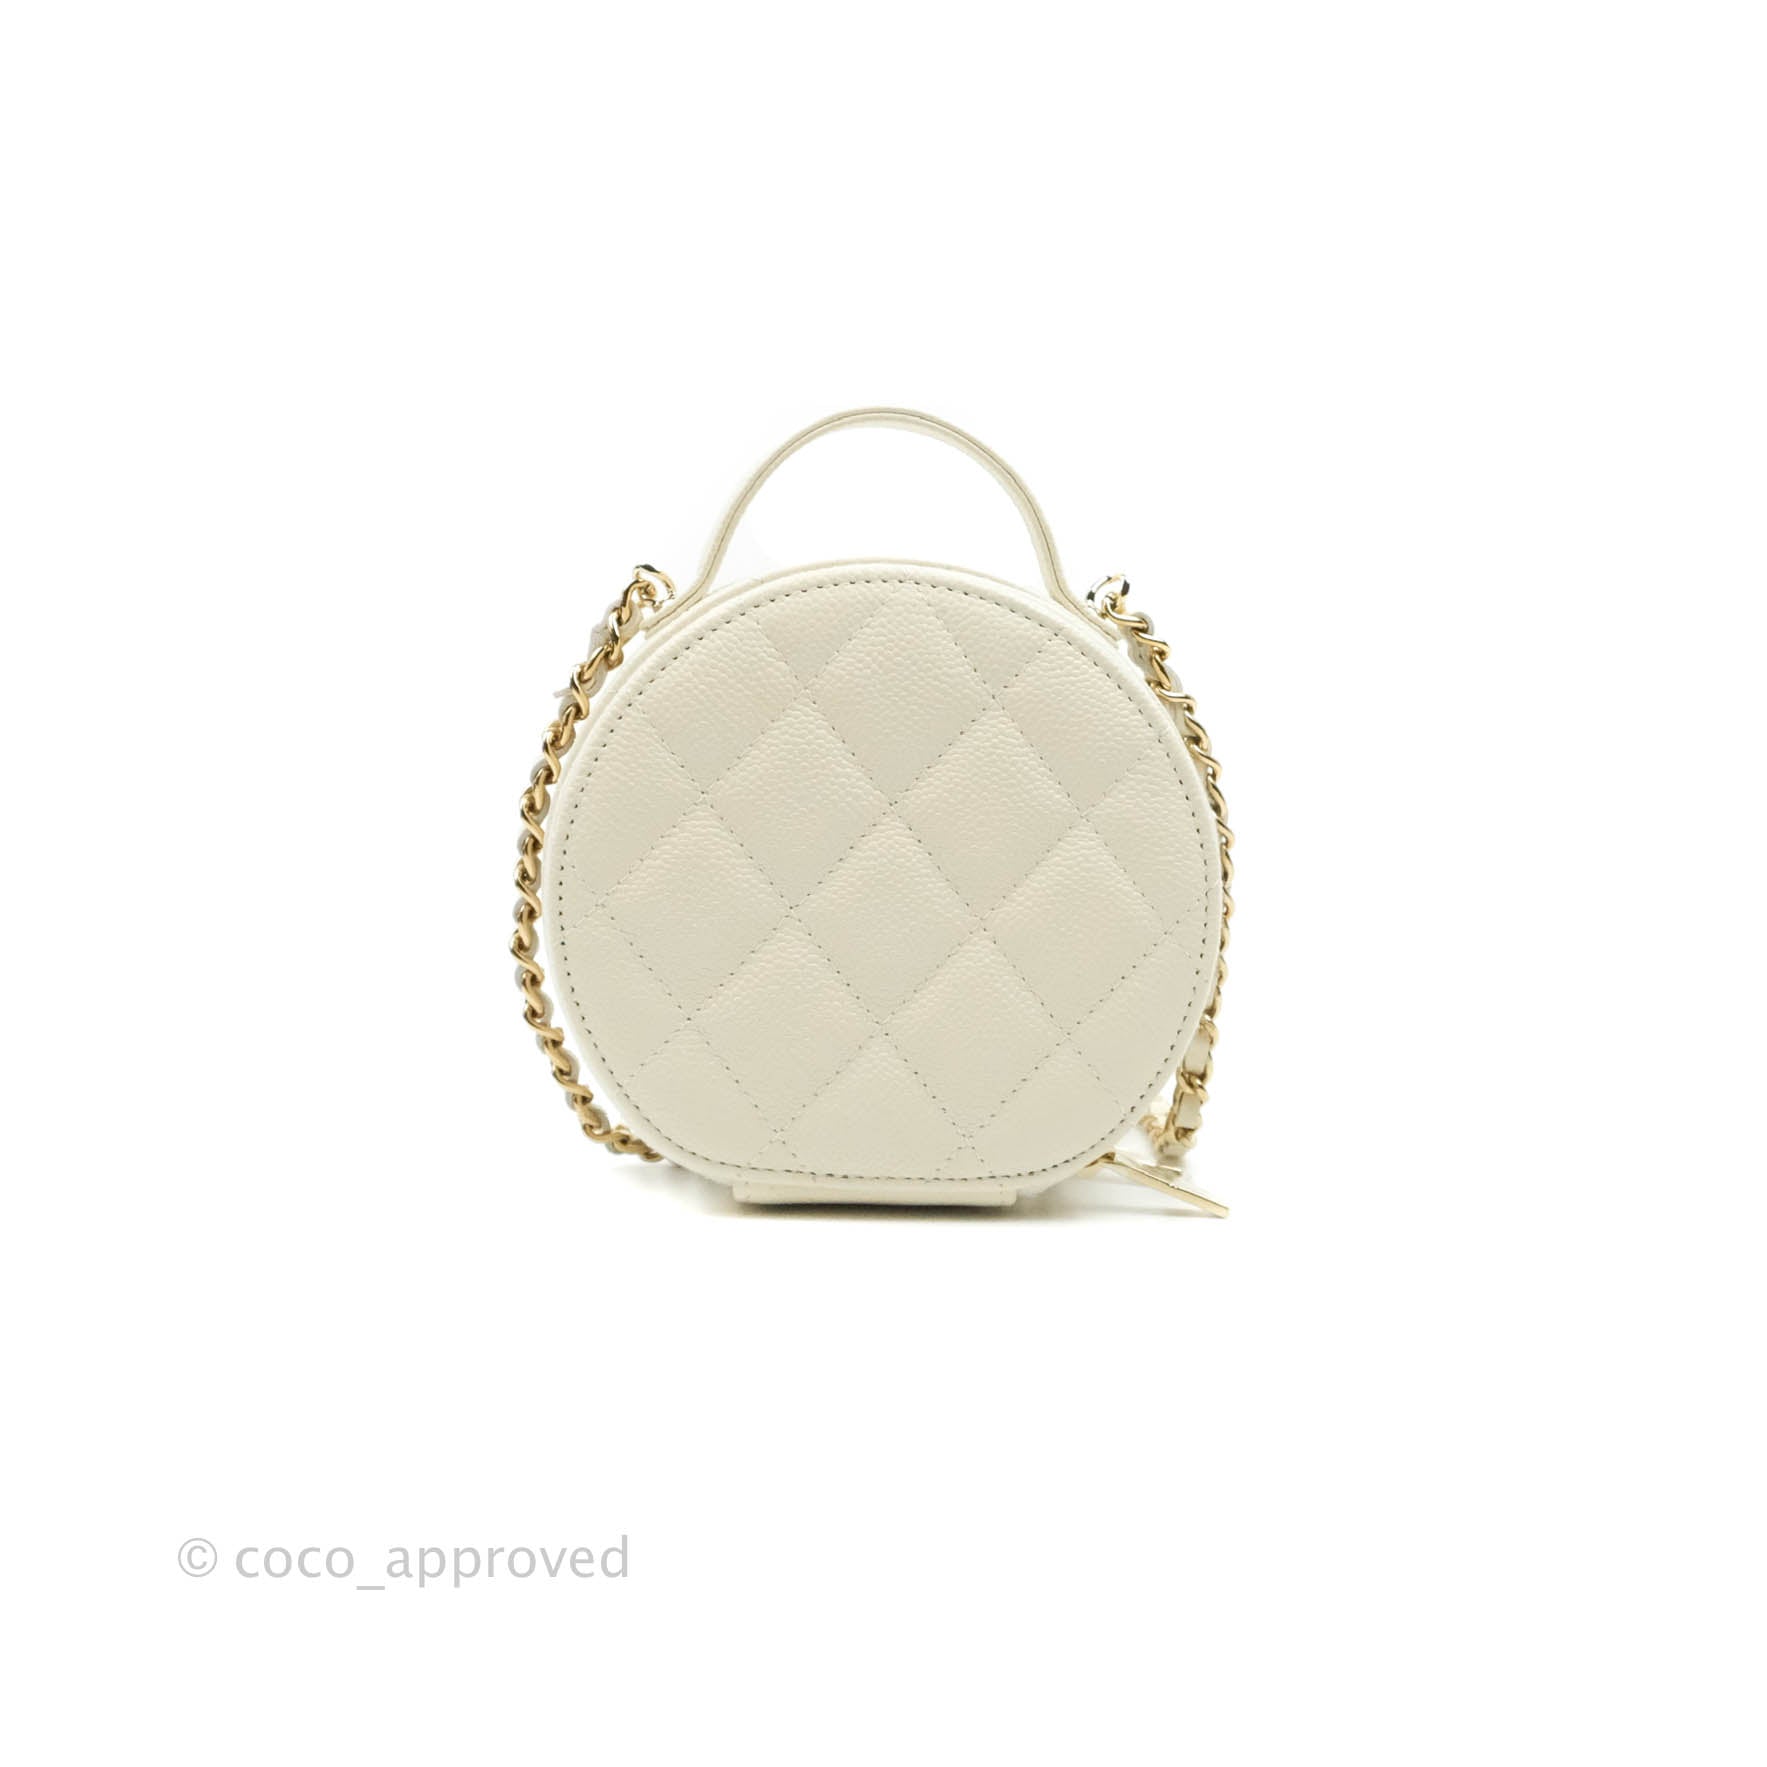 White lv bag, - comes with a small round bag that is